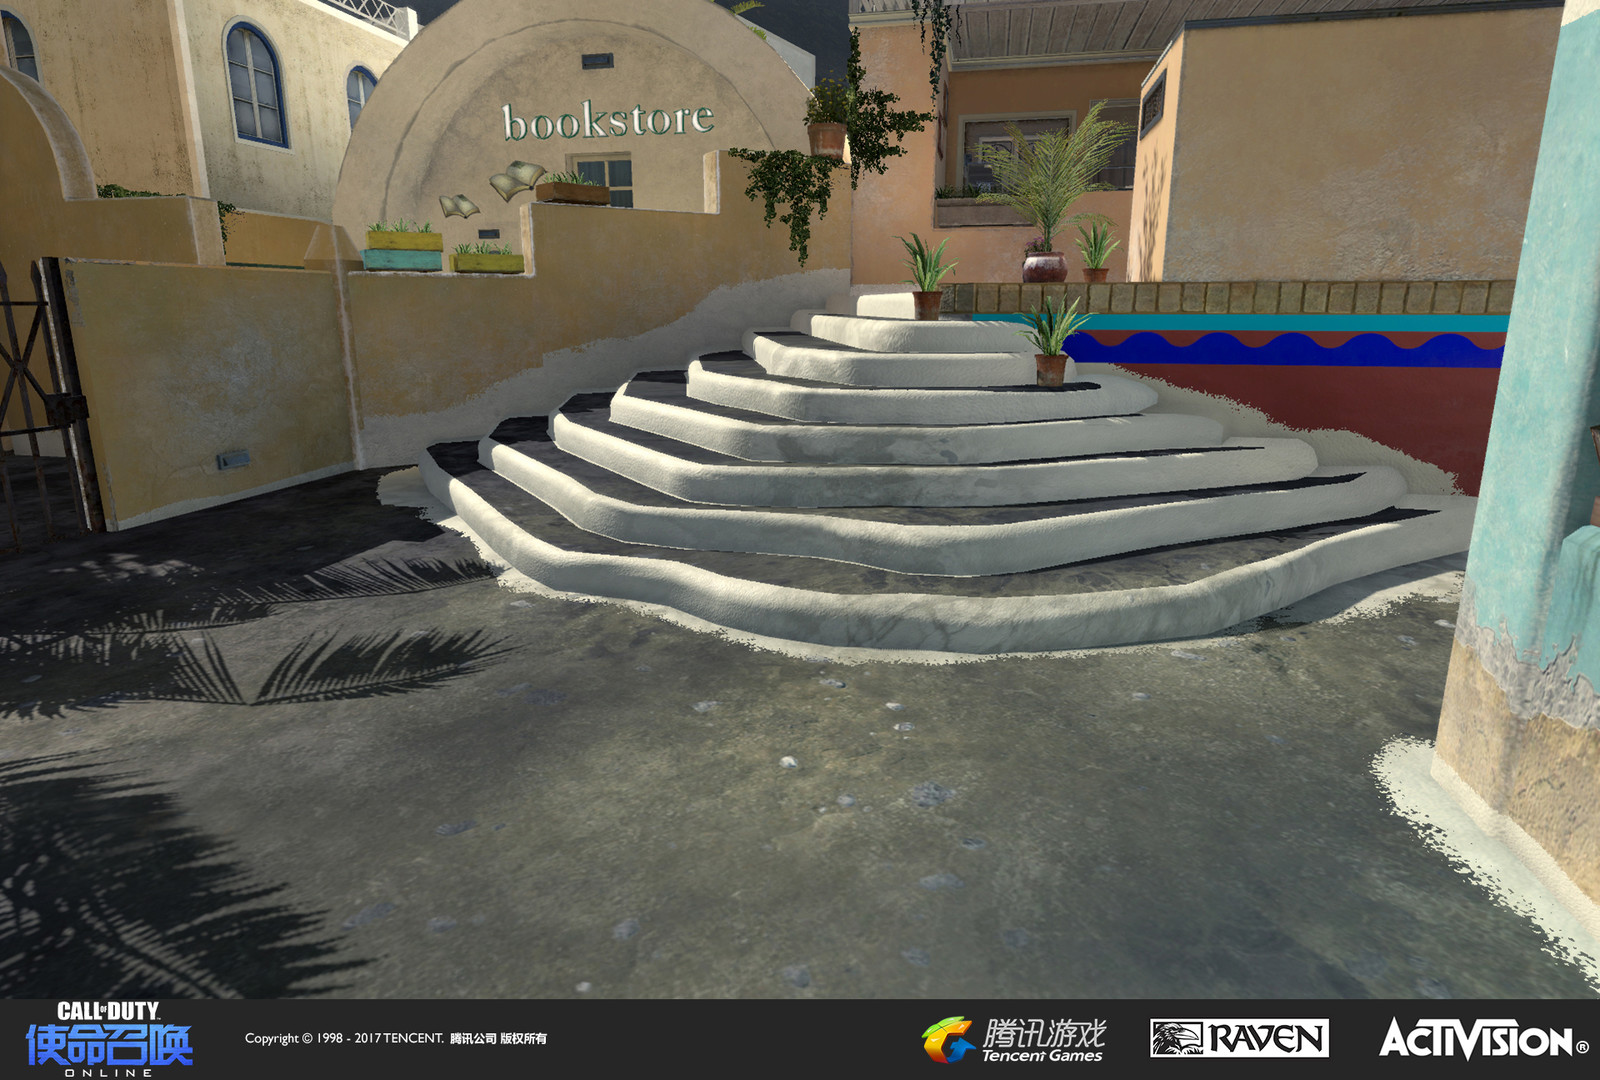 Plaster stairs based on the aesthetics of stairways found in Santorini, Greece. Created in the game engine and utilizing plaster treatment that I created. The building facades in the background were created by Raquel Garcia.